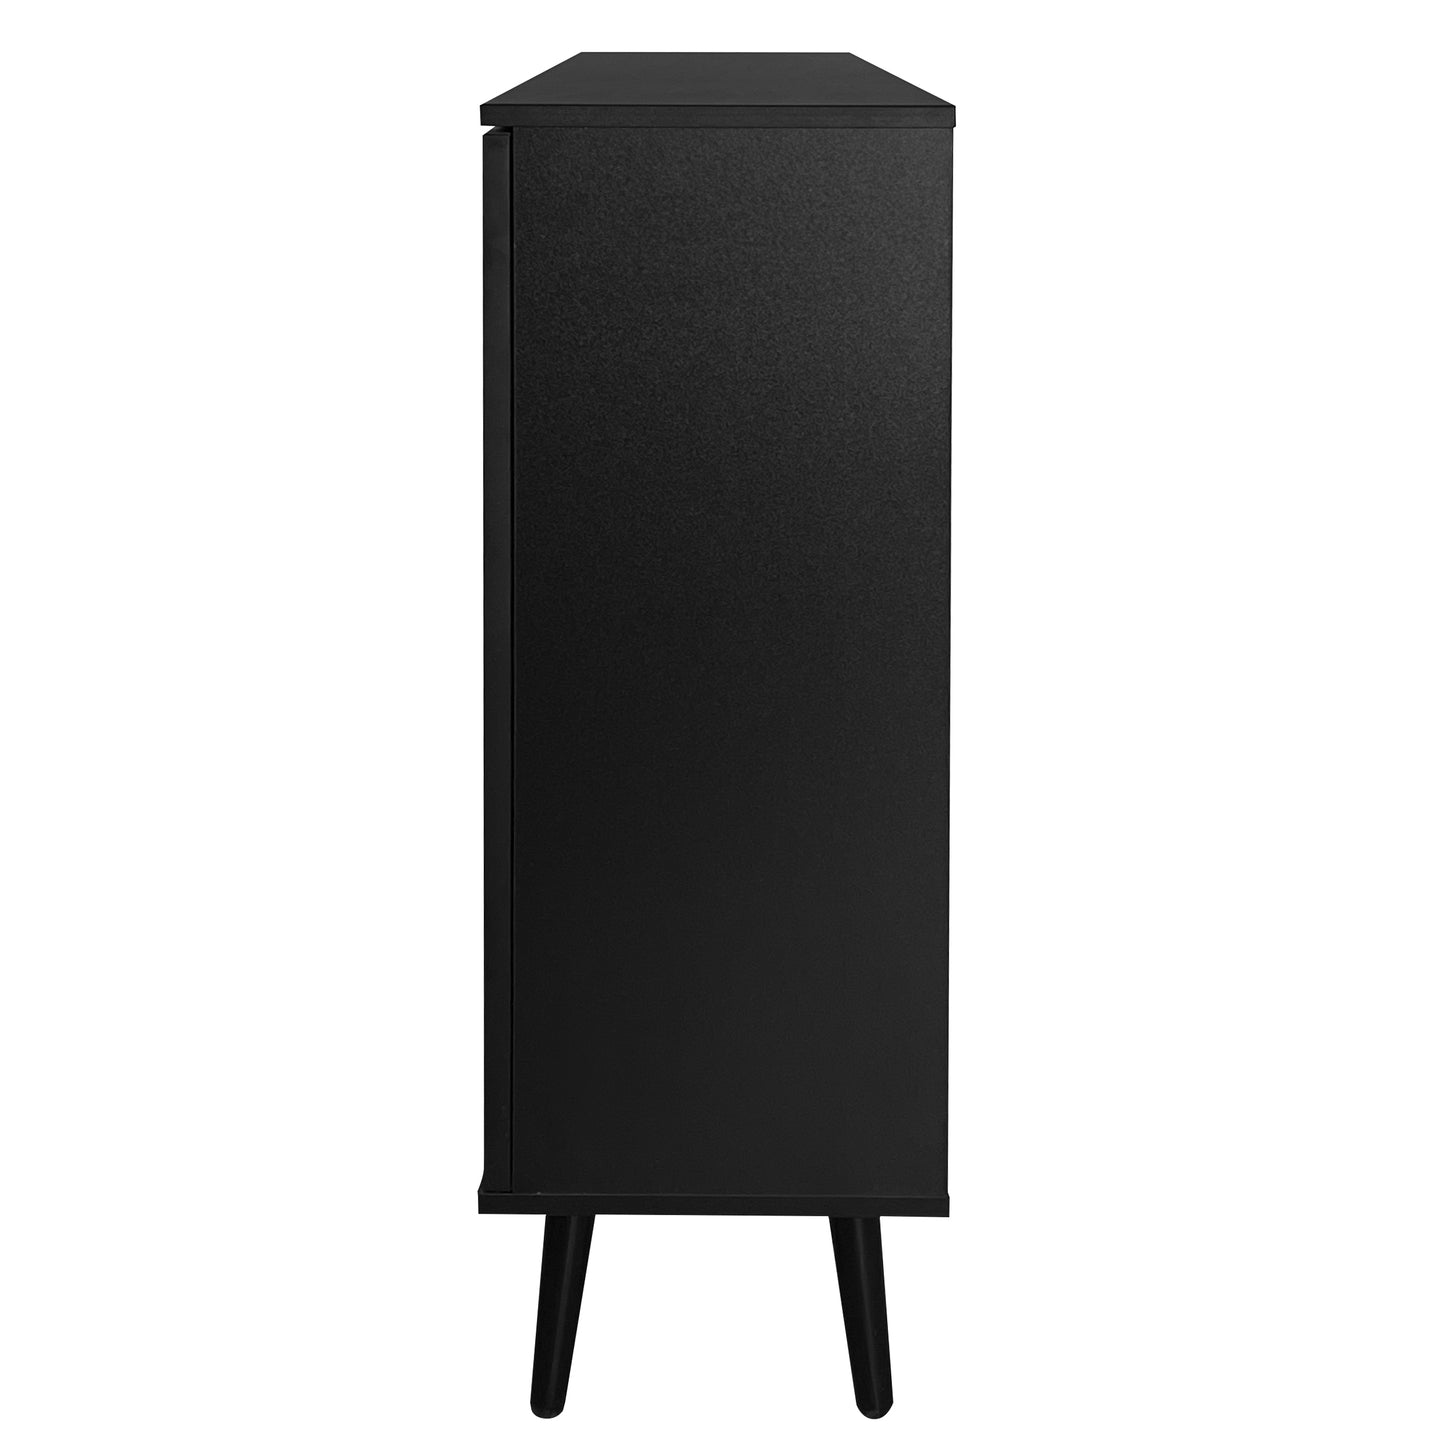 U_STYLE   Featured Two-door Storage Cabinet with Two Drawers and Metal Handles, Suitable for Corridors, Entrances, Living rooms.